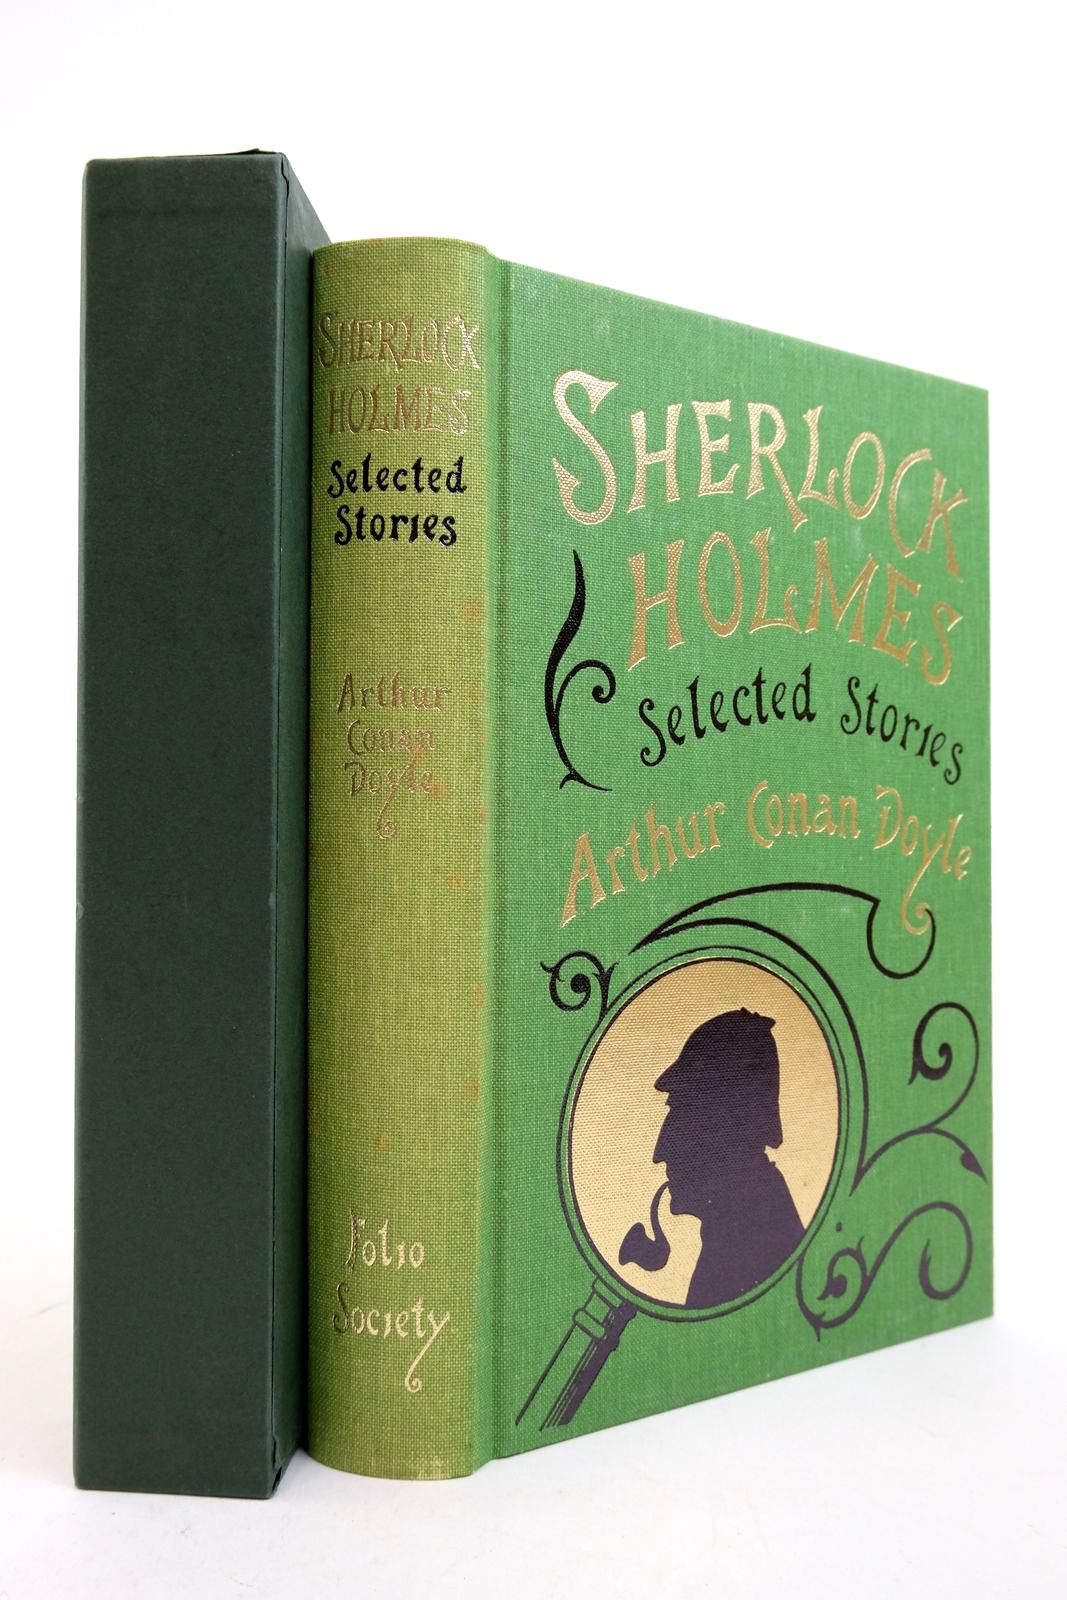 Photo of SHERLOCK HOLMES SELECTED STORIES written by Doyle, Arthur Conan Green, Richard Lancelyn illustrated by Mosley, Francis published by Folio Society (STOCK CODE: 2139486)  for sale by Stella & Rose's Books